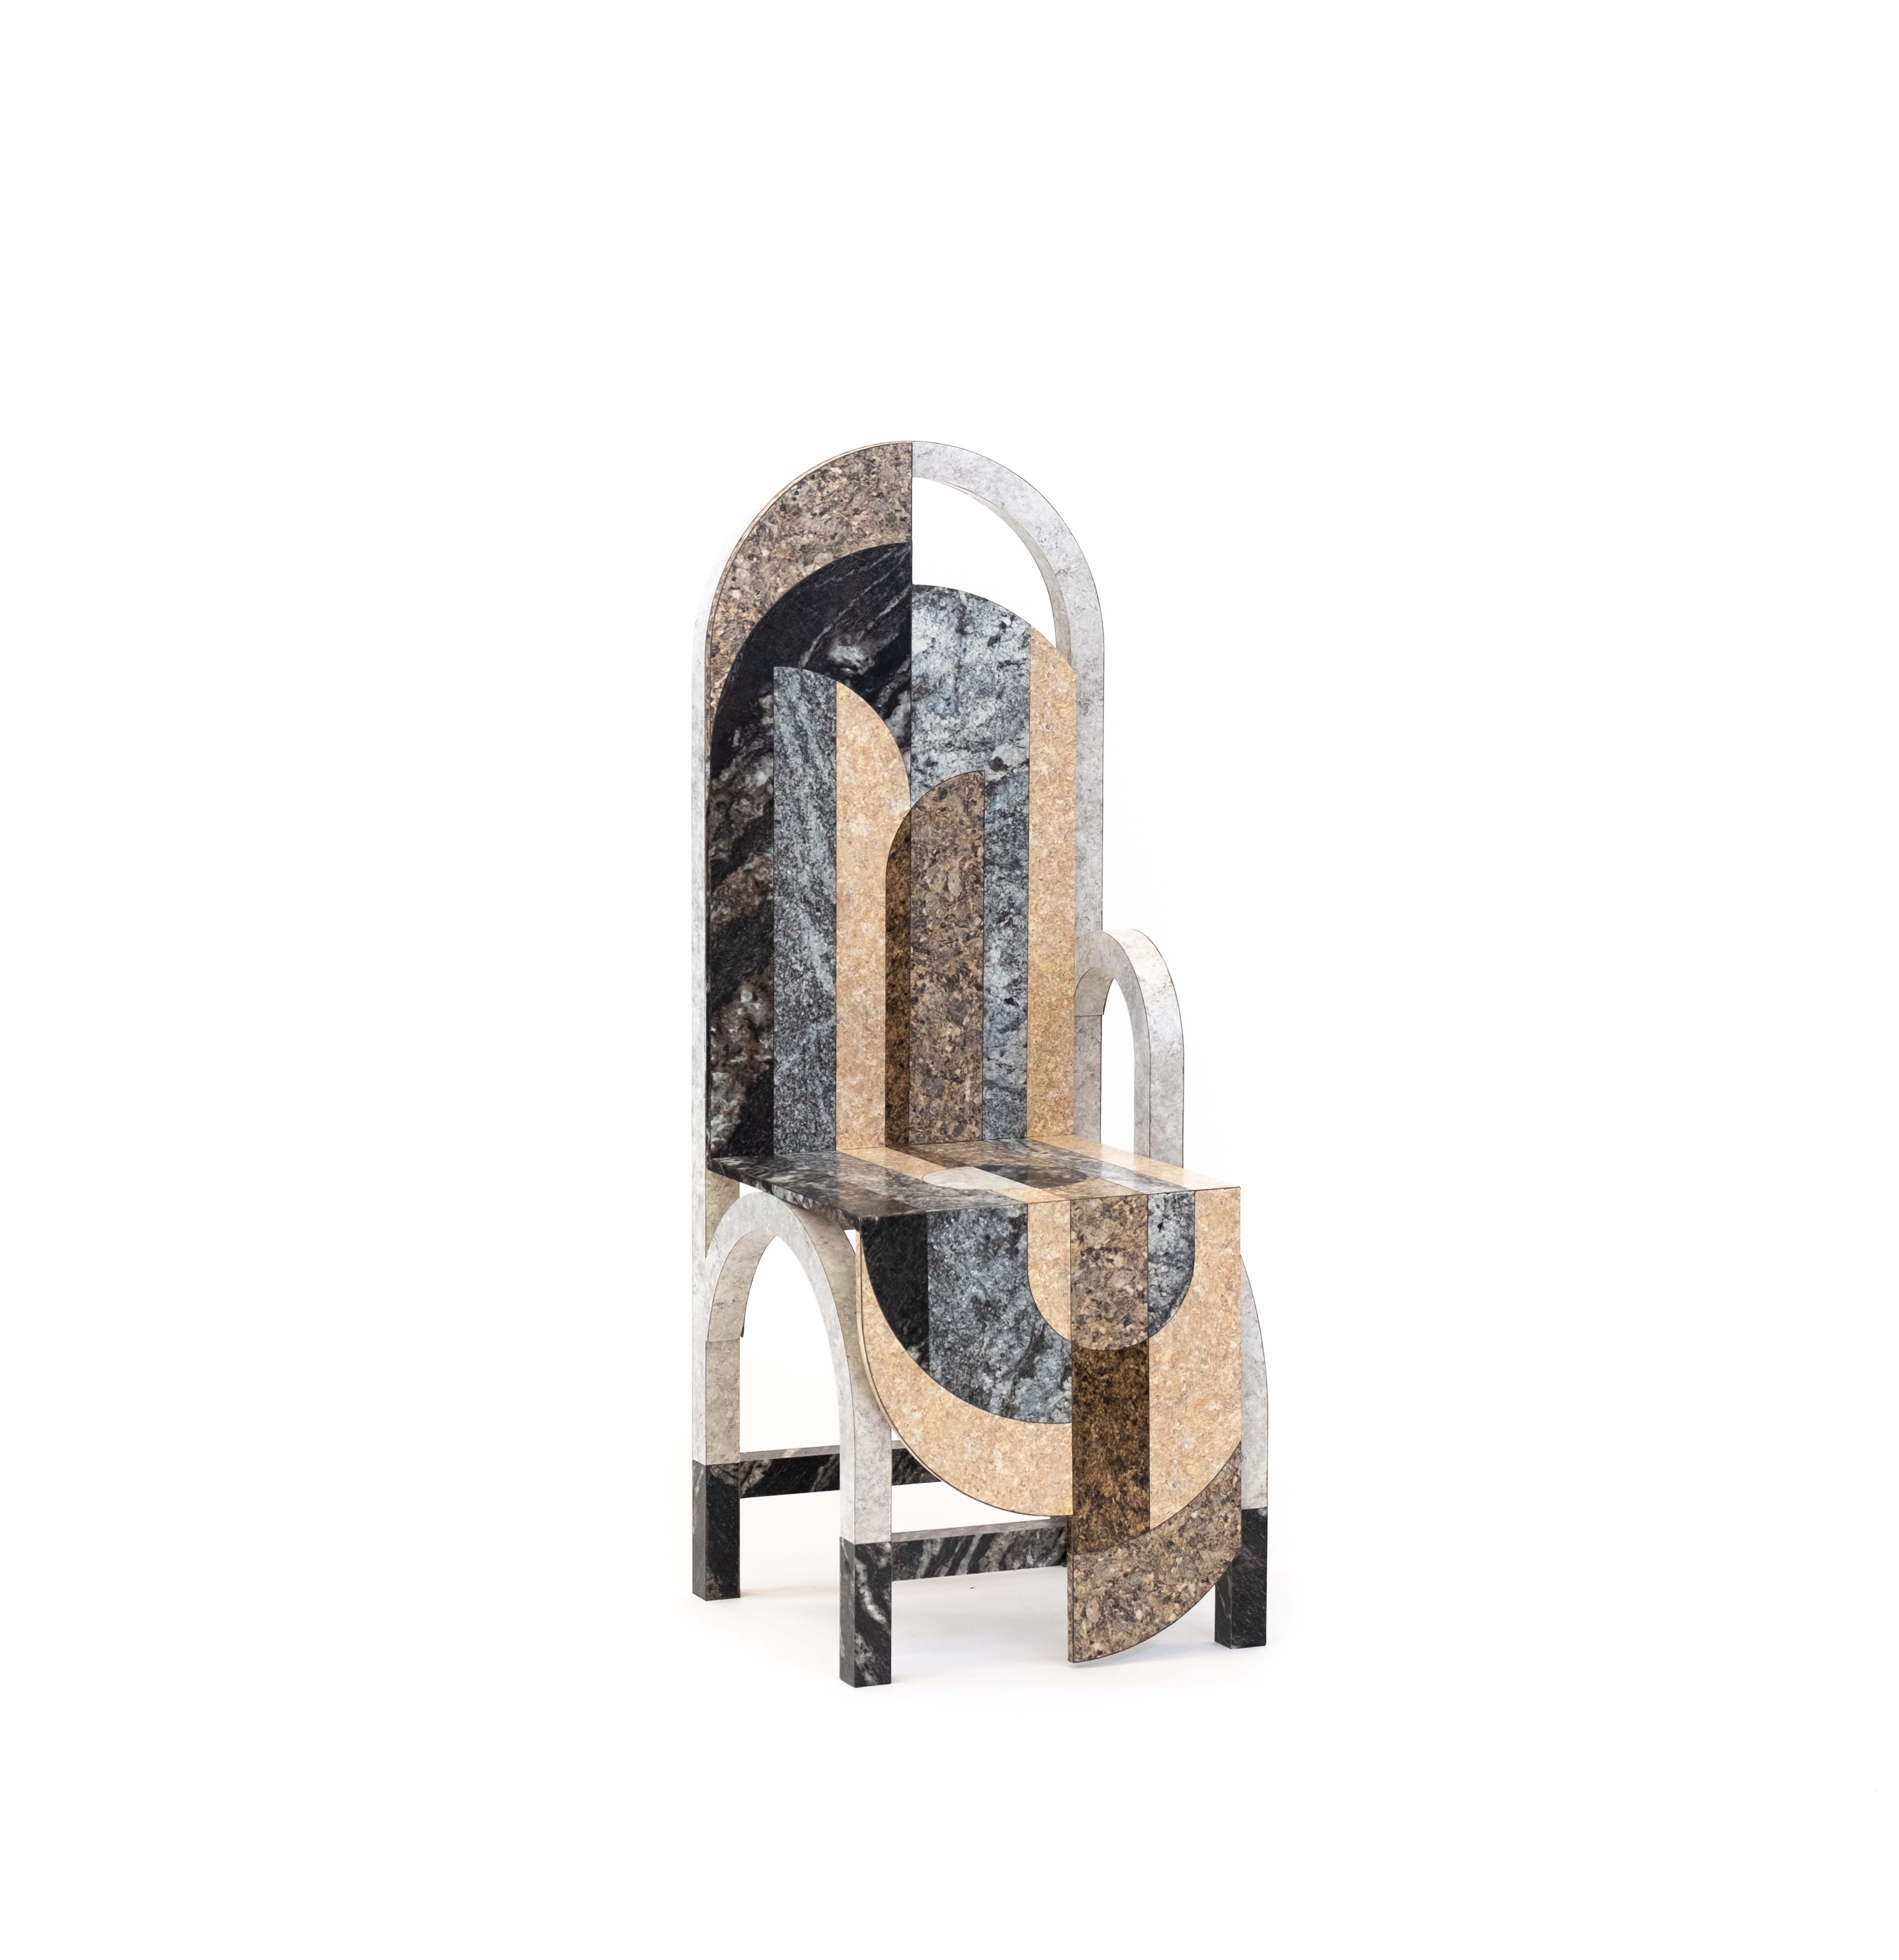 An elaborate chair with marbled white, black and brown arched semi-circle shapes layered on the surface.